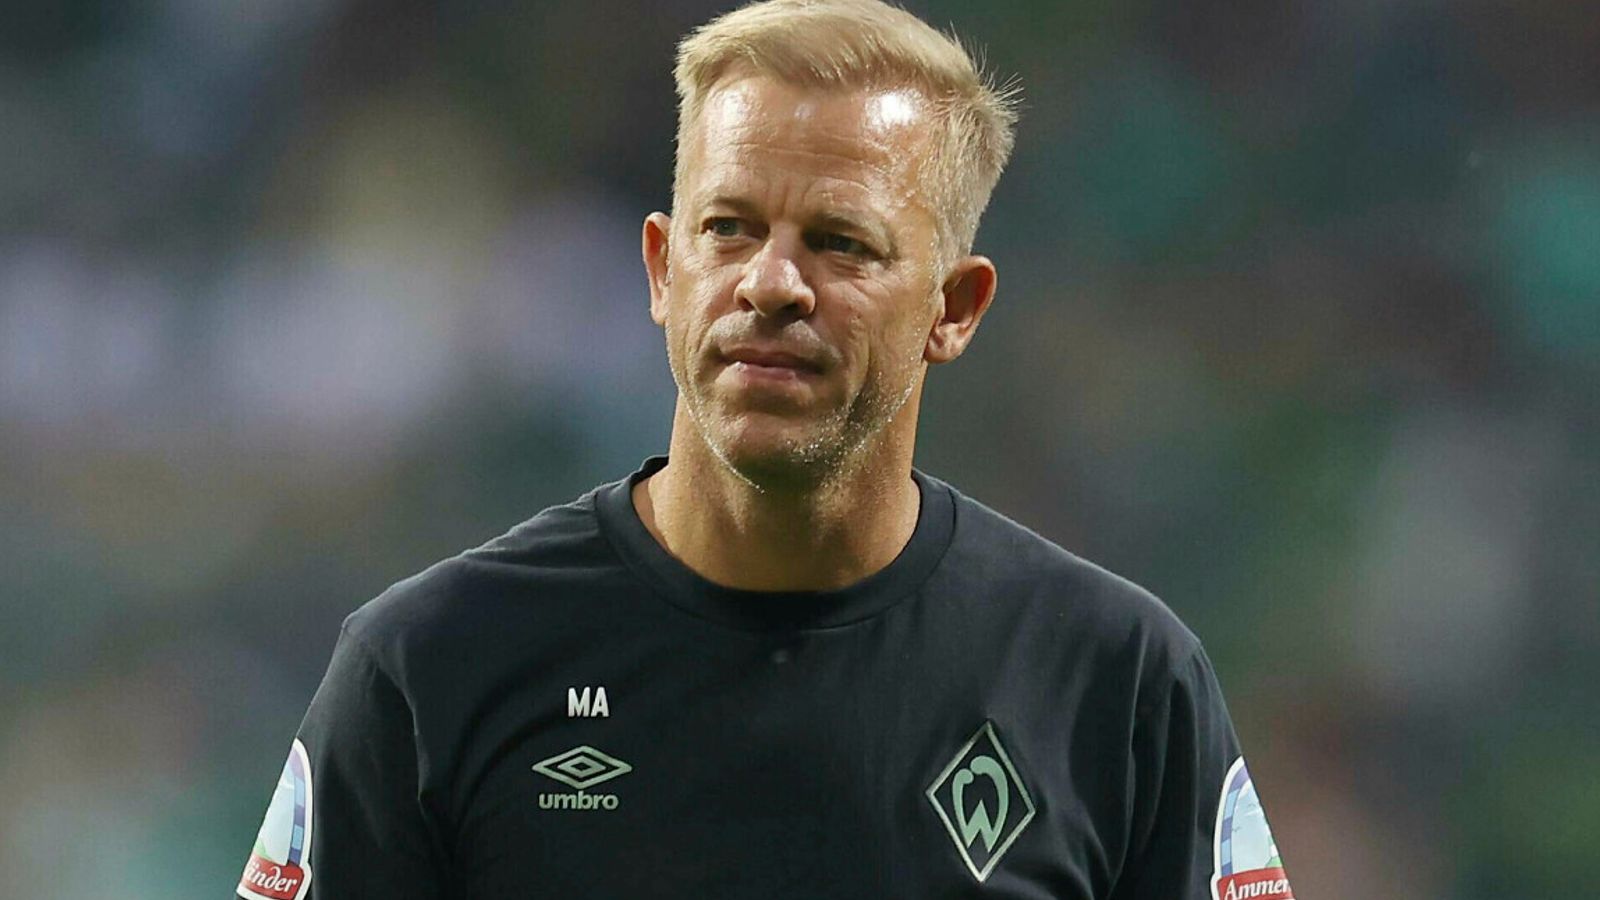 Markus Anfang: Werder Bremen head coach steps down amid investigation into alleged use of forged Covid-19 vaccination document